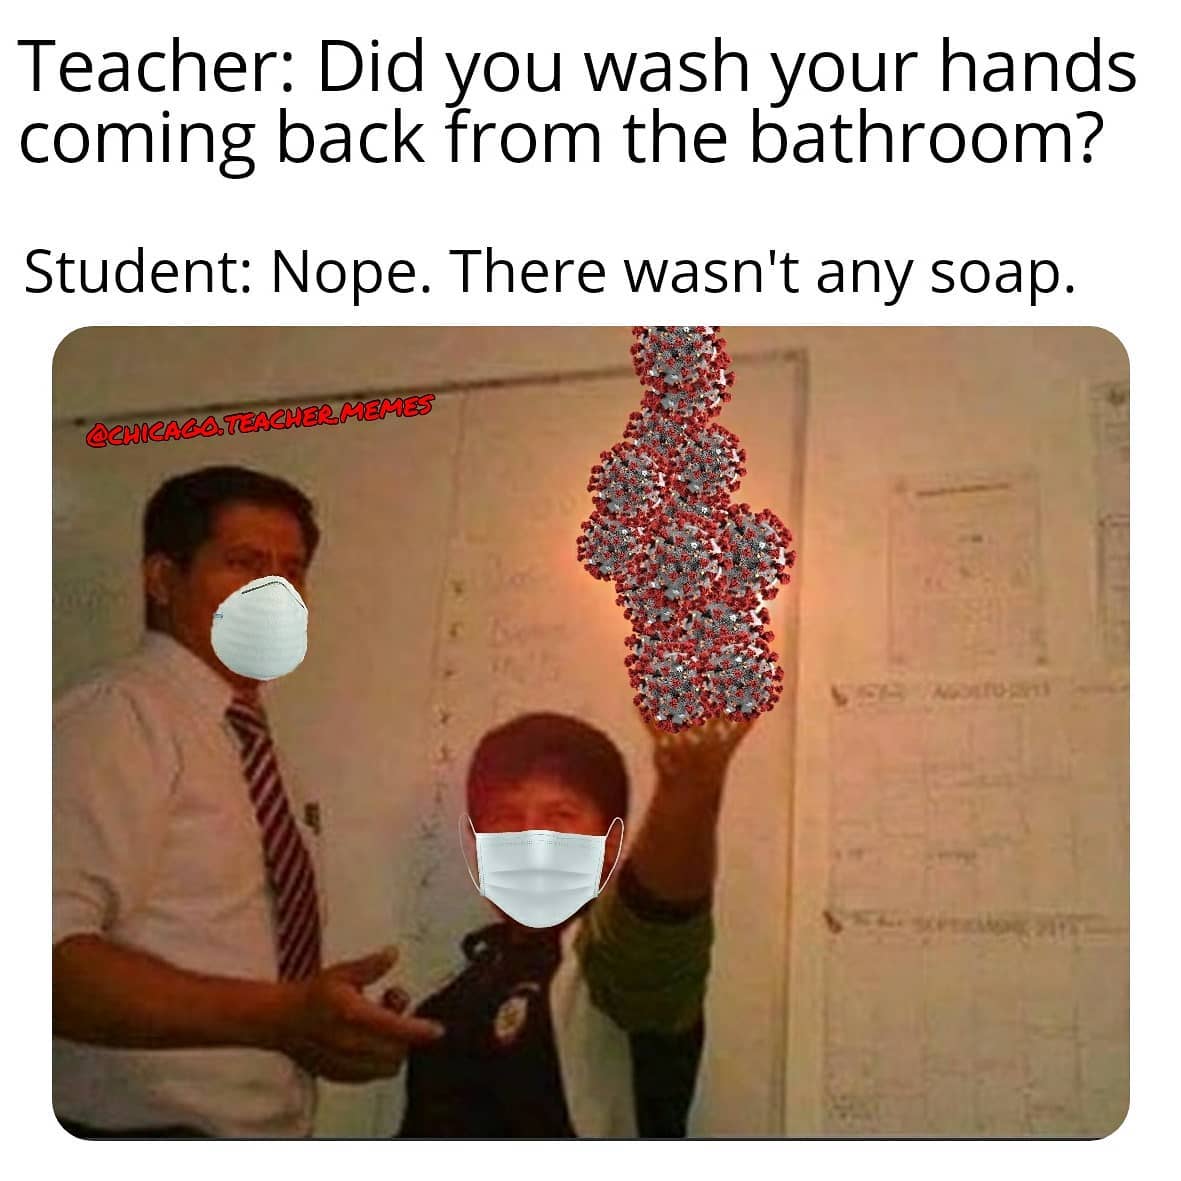 human behavior - Teacher Did you wash your hands coming back from the bathroom? Student Nope. There wasn't any soap. Teach